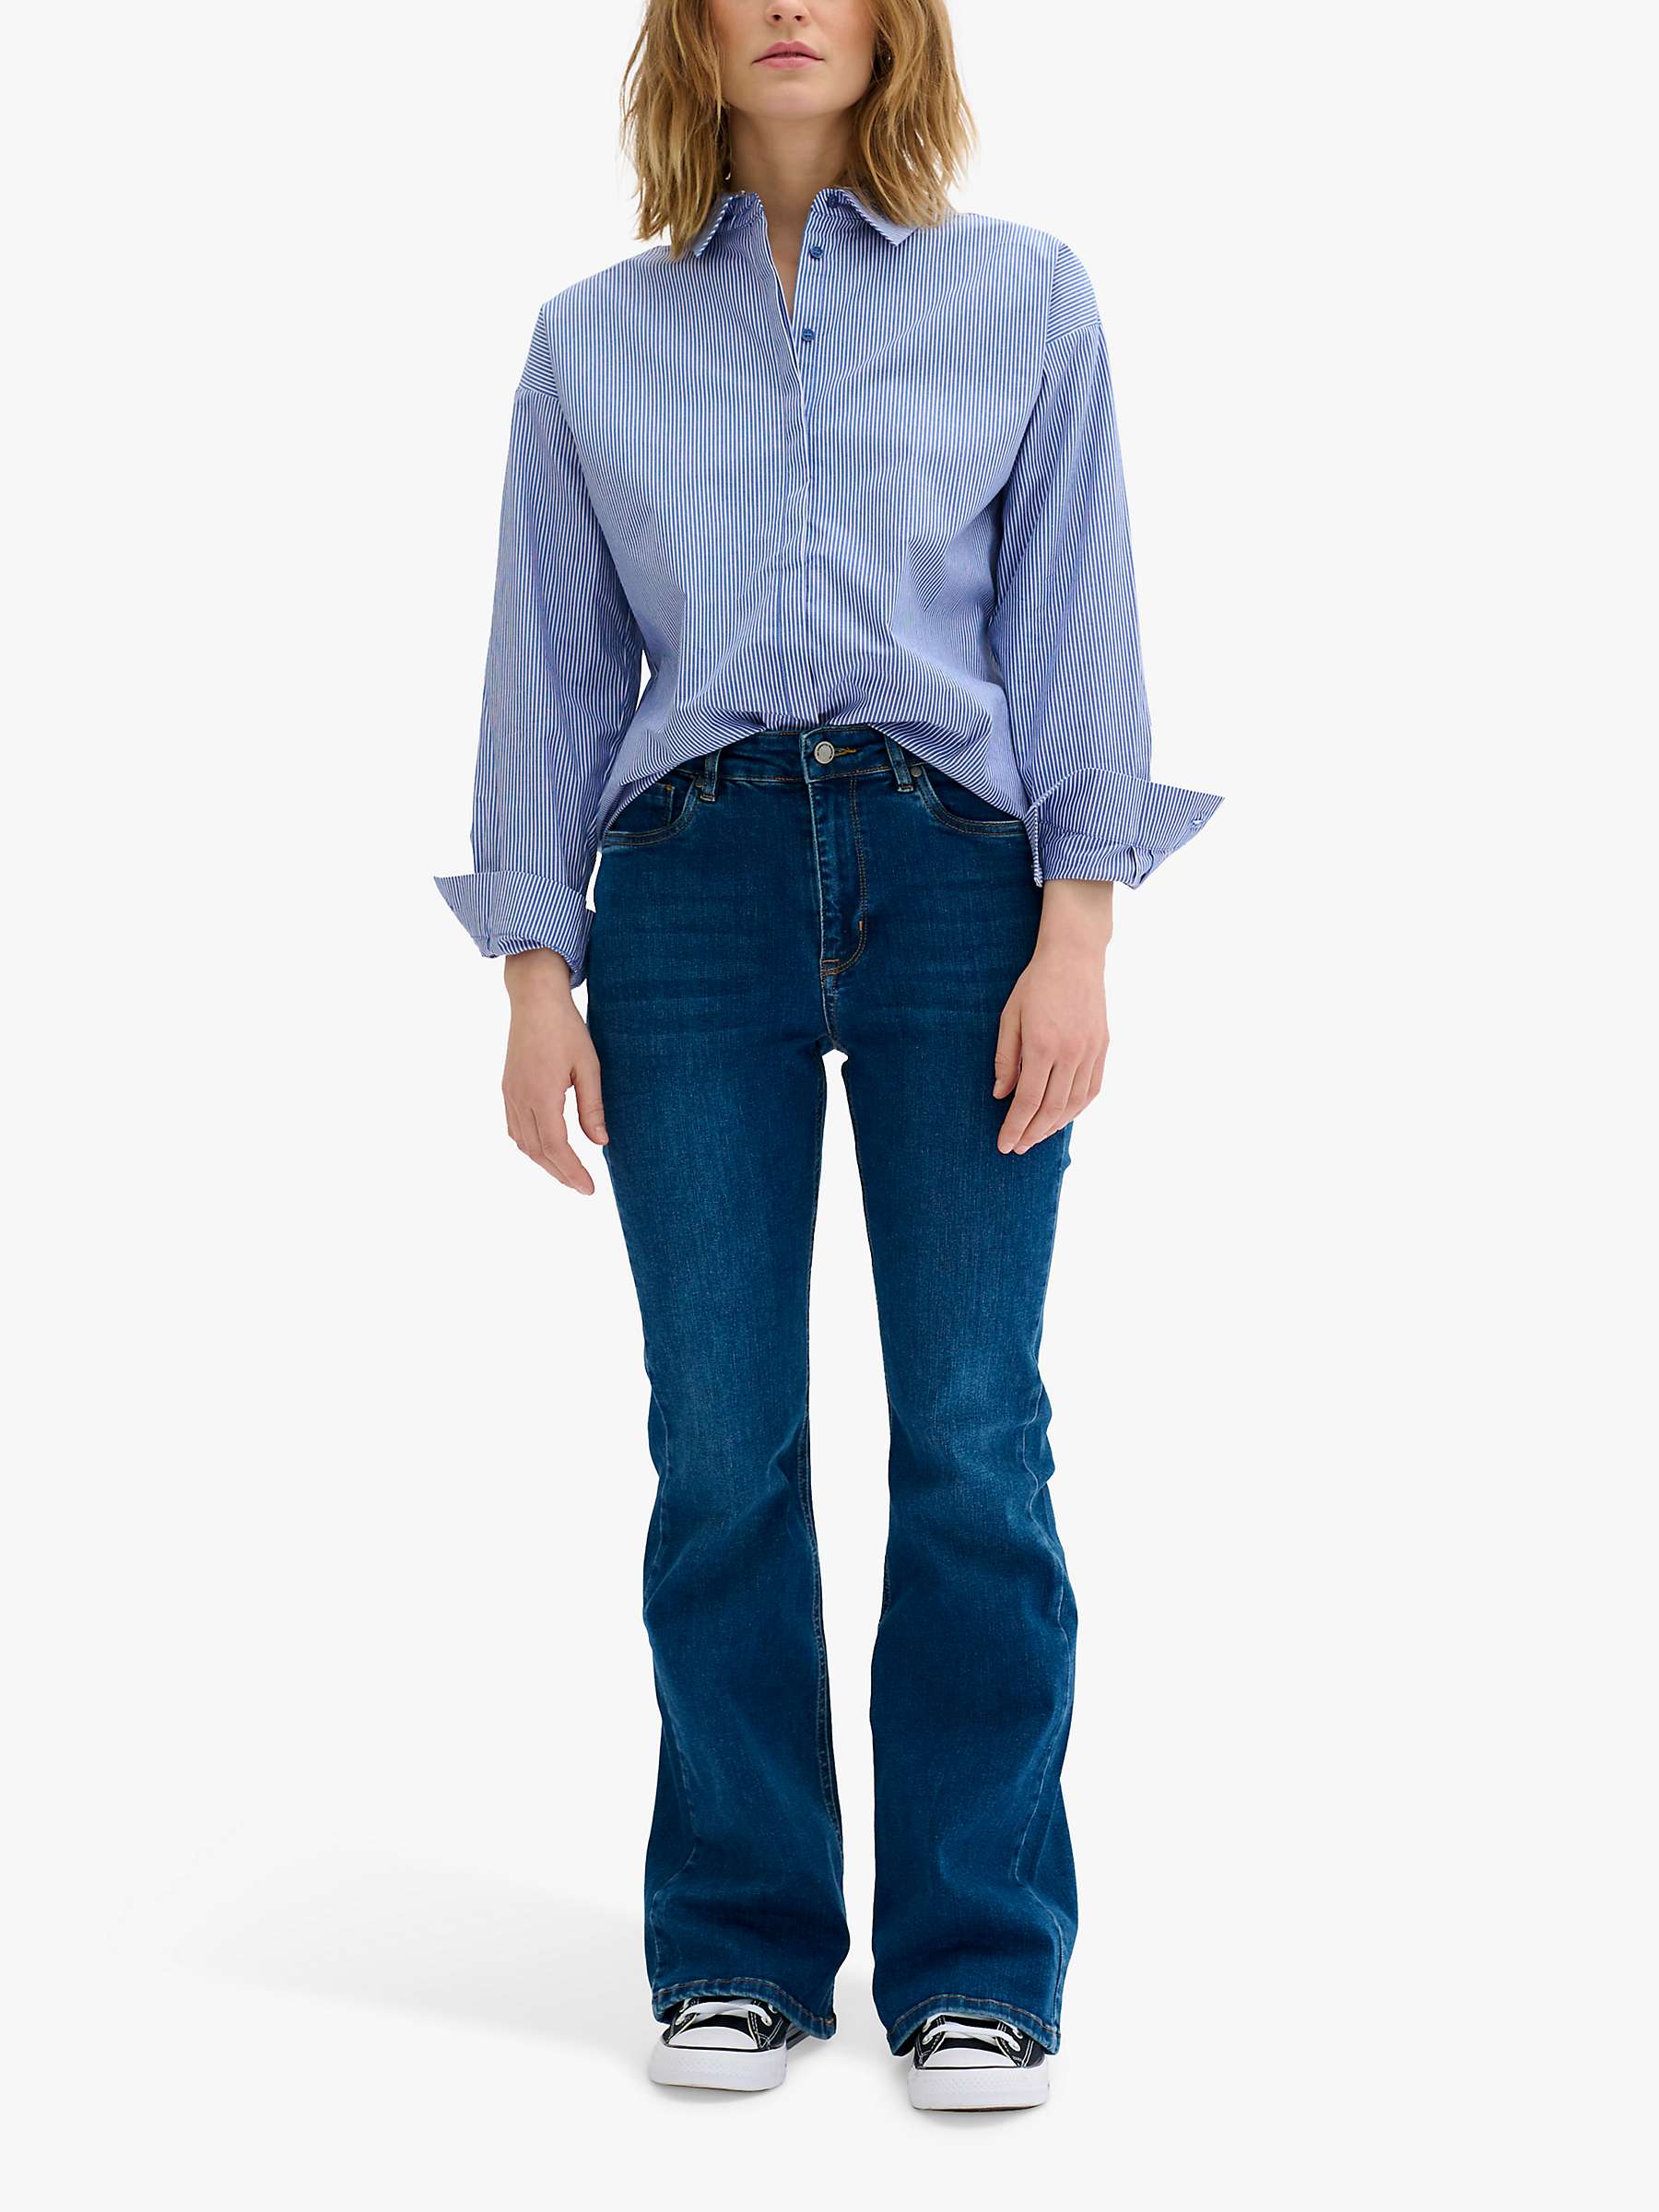 Buy MY ESSENTIAL WARDROBE Button Up Casual Fit Cotton Shirt, Medium Blue Online at johnlewis.com